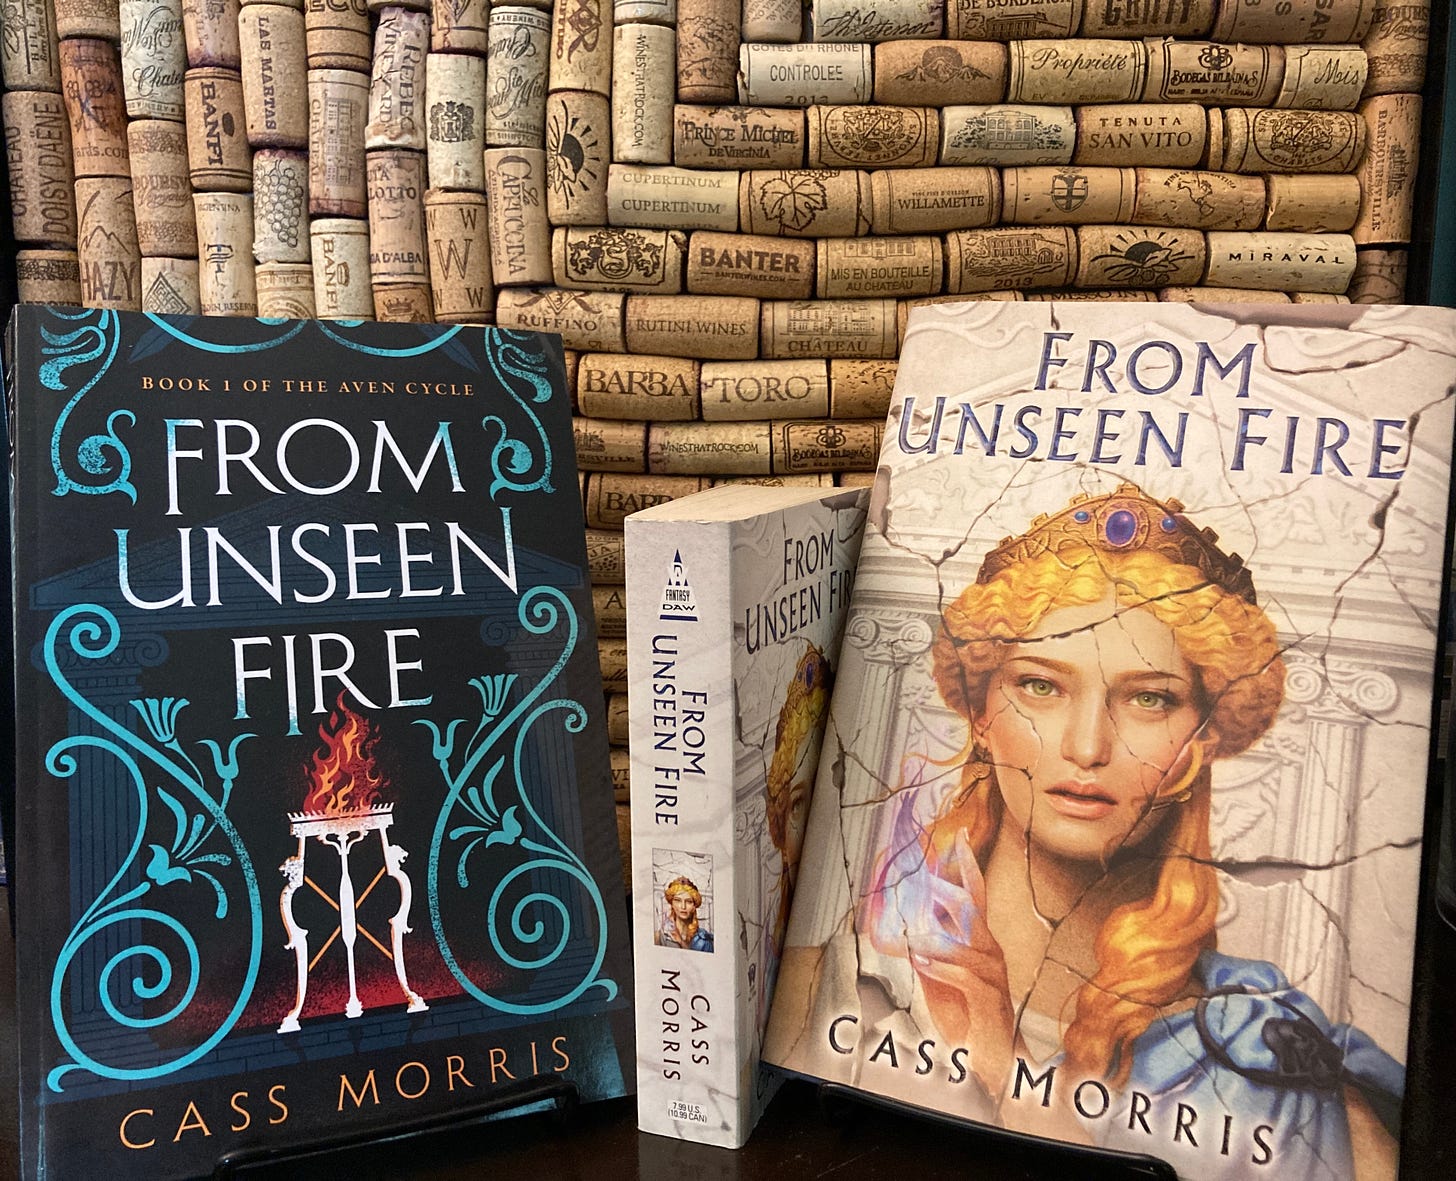 Three editions (hardcover, paperback, and mass market) of FROM UNSEEN FIRE by Cass Morris